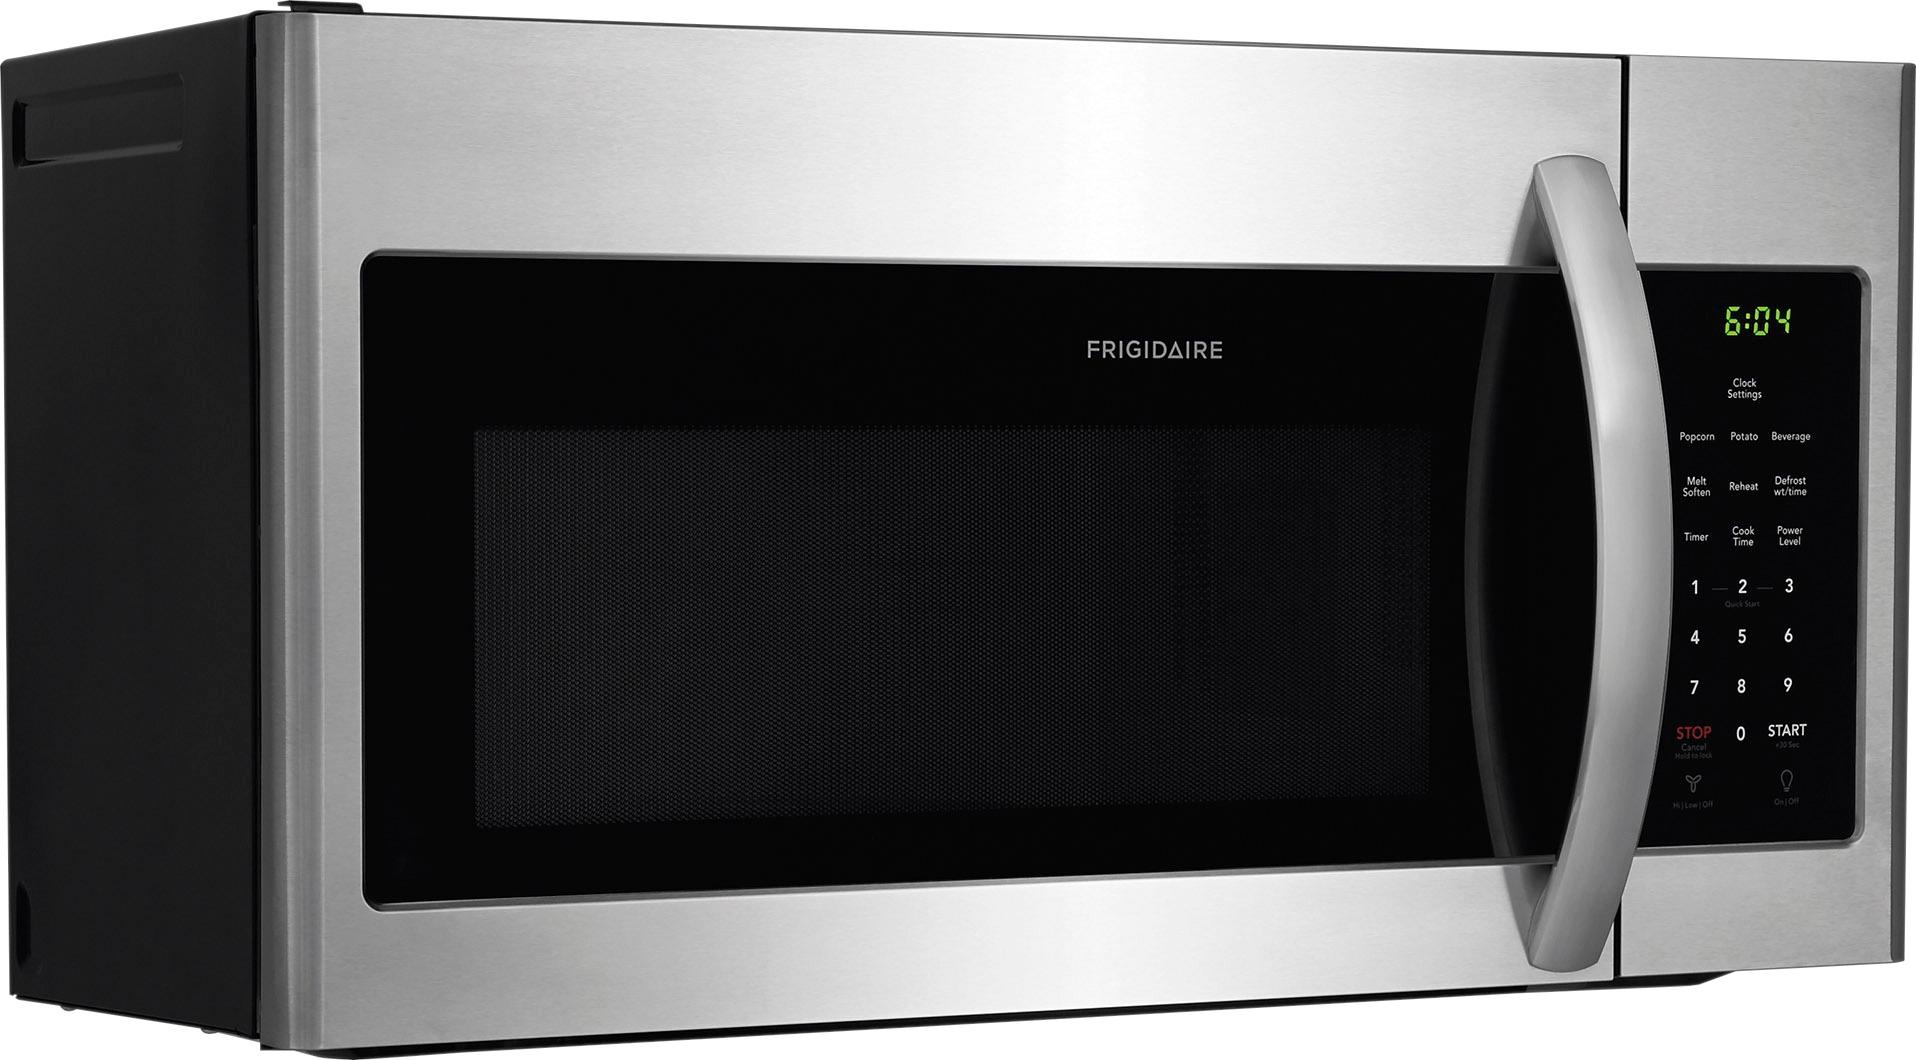 Best Buy: Frigidaire 1.6 Cu. Ft. Over-the-Range Microwave Stainless